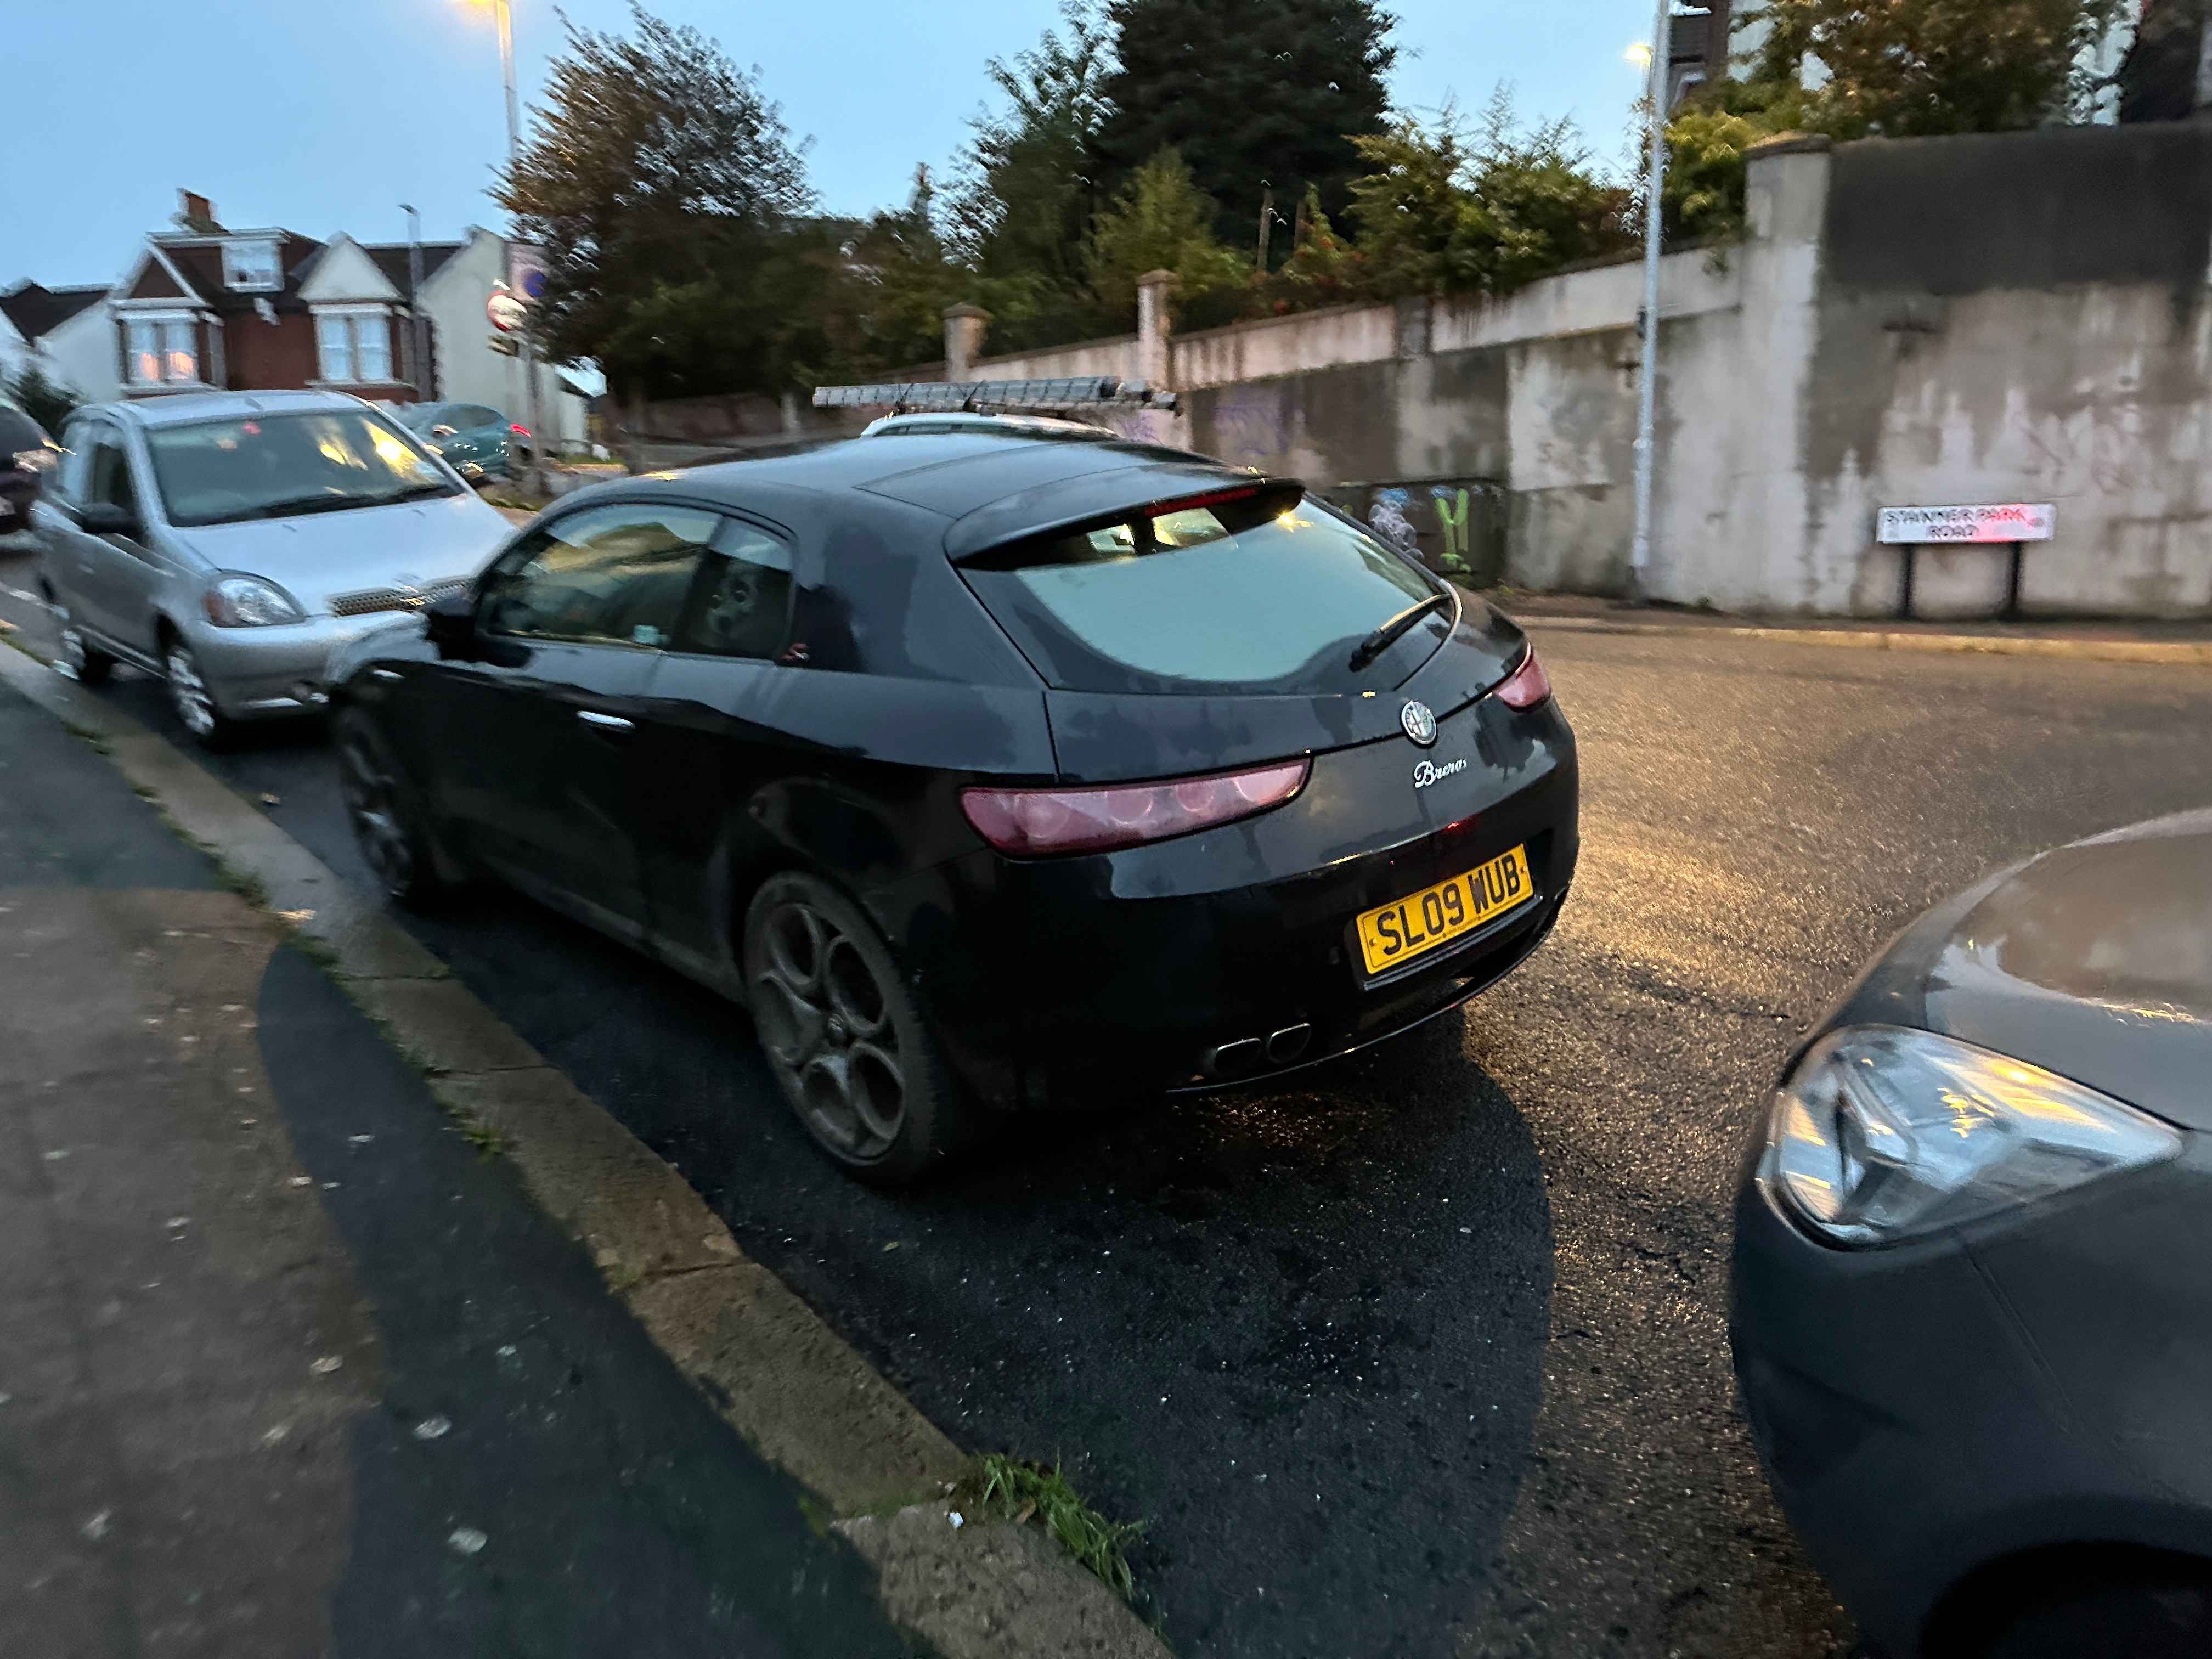 Photograph of SL09 WUB - a Black Alfa Romeo Brera parked in Hollingdean by a non-resident. The thirteenth of twenty photographs supplied by the residents of Hollingdean.